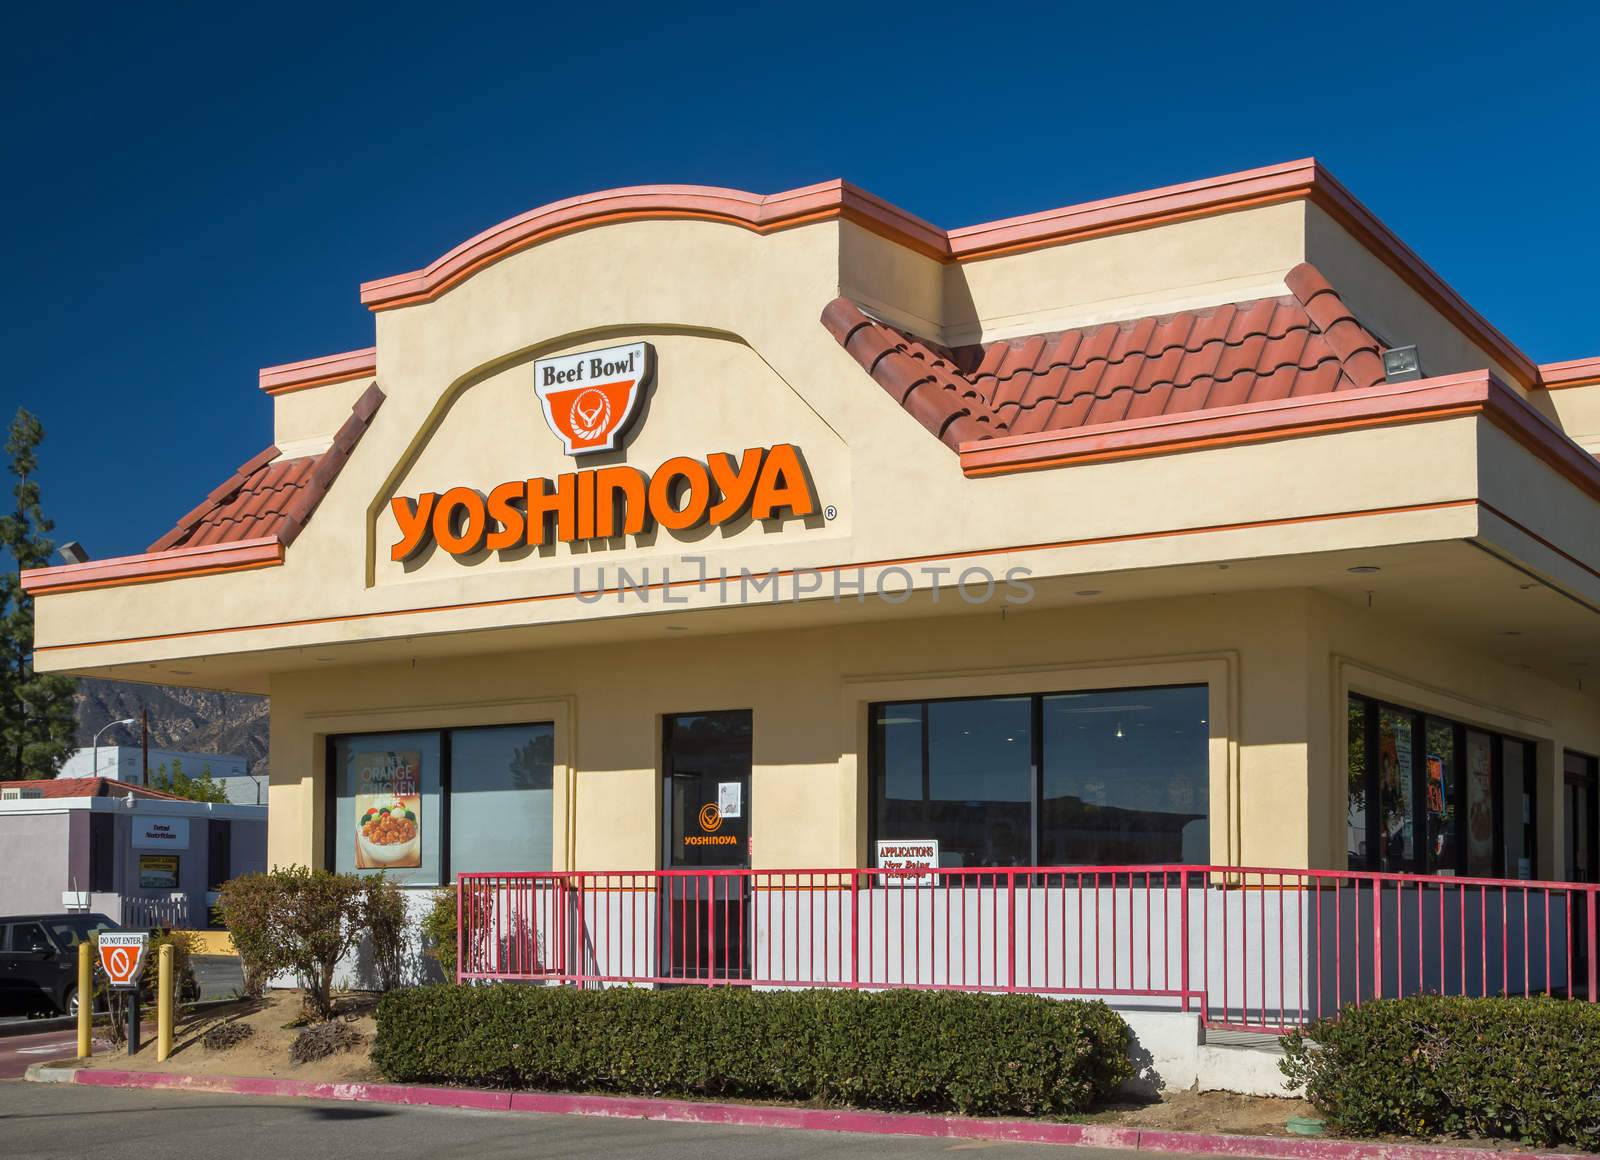 Yoshinoya Beef Bowl Restaurant Exterior and Sign. by wolterk